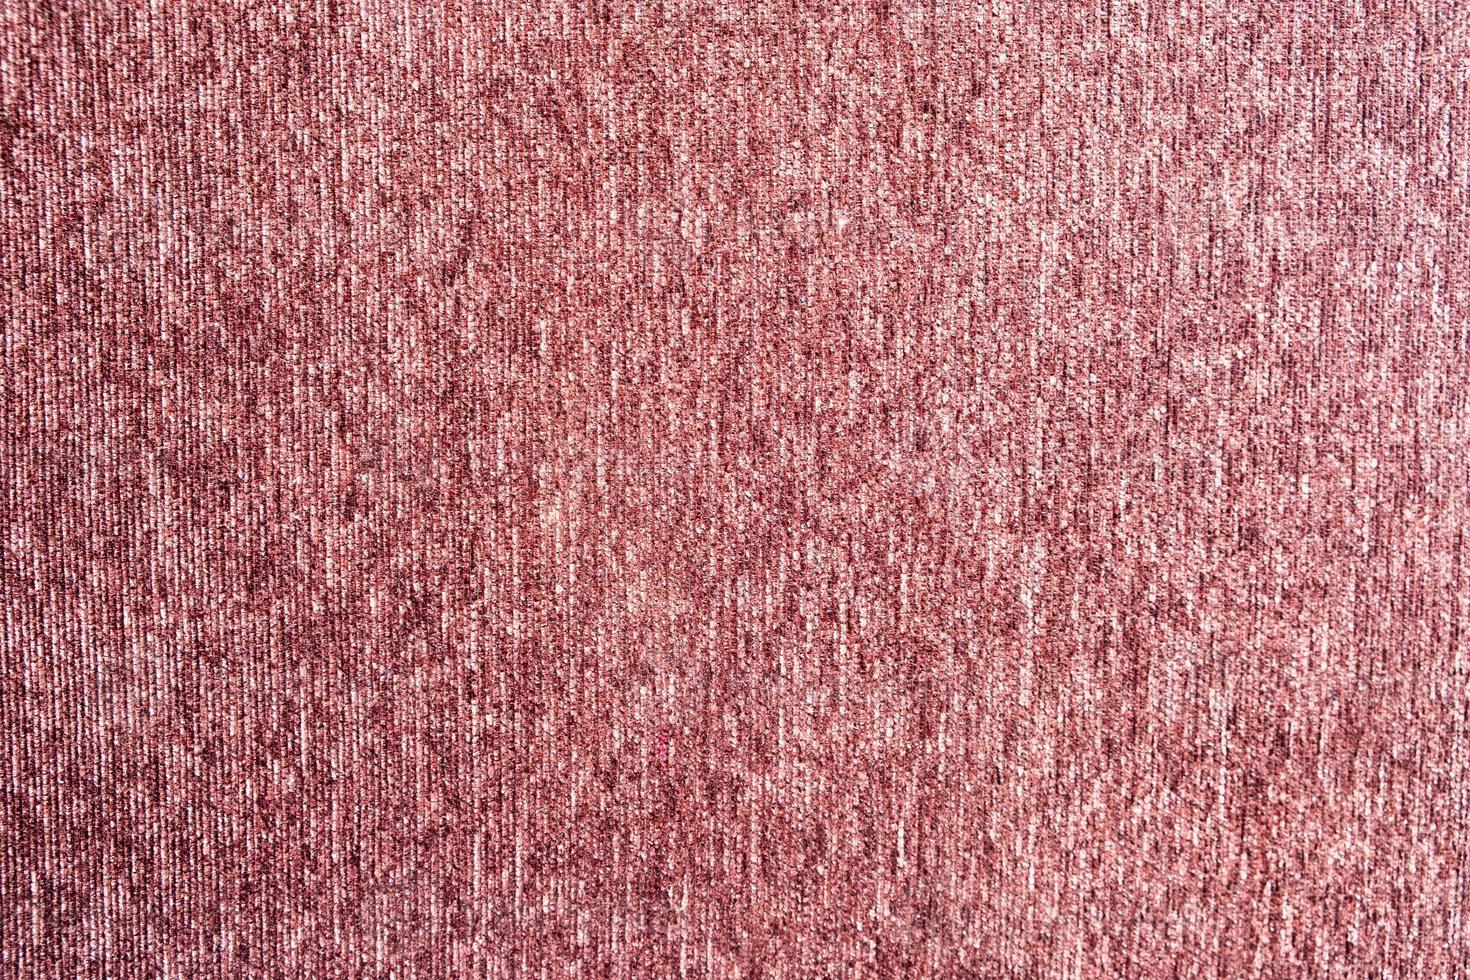 Pink red carpet cloth fluff texture photo